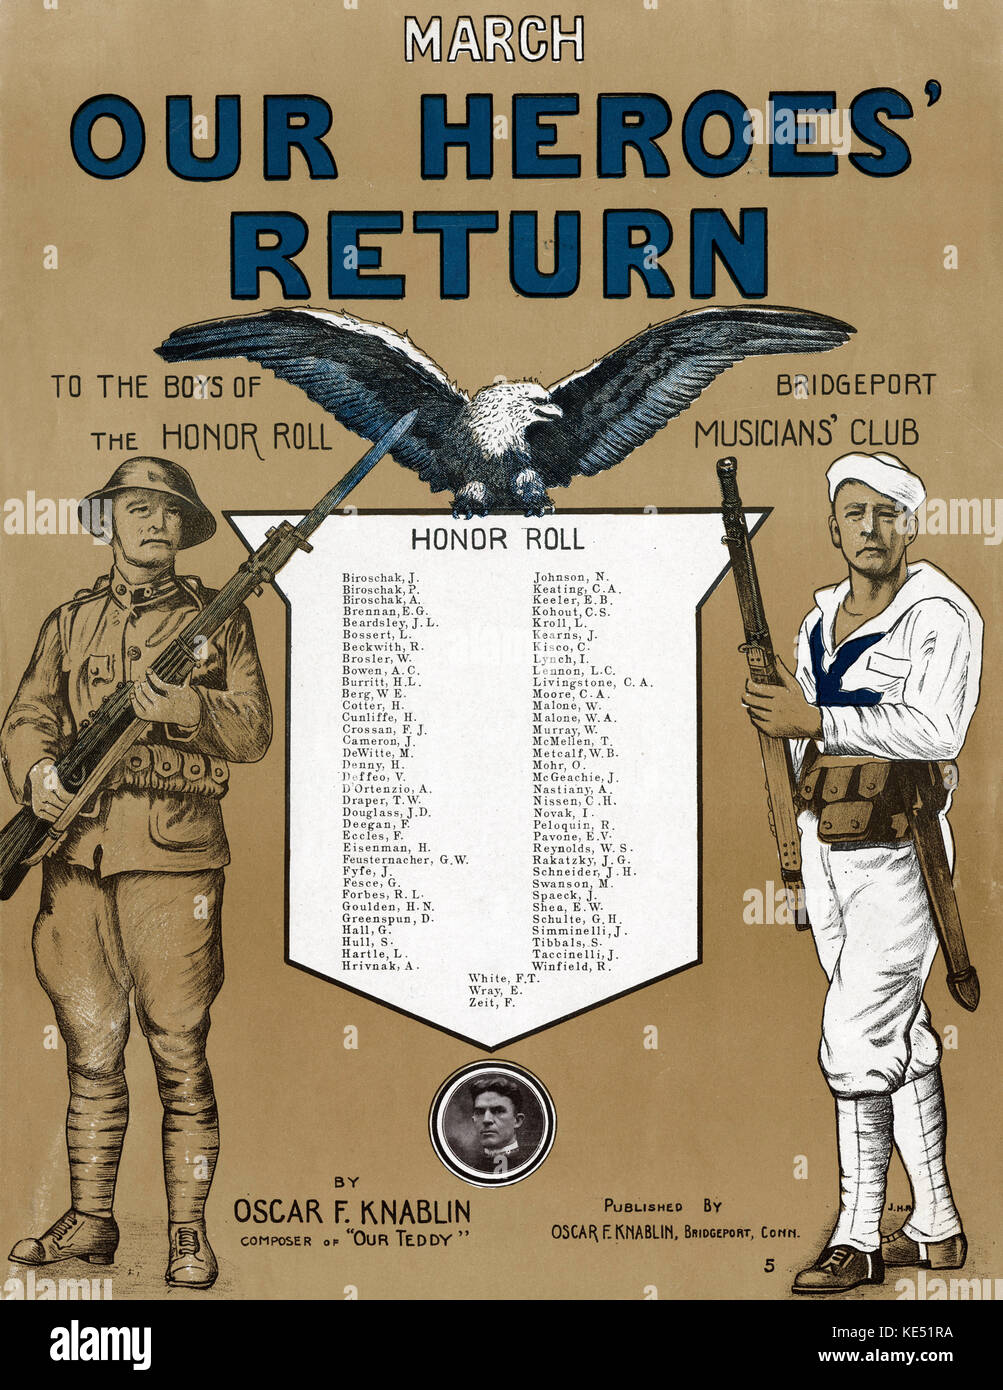 'March - Our Heroes Return' -  by Oscar Knablin to honour the returning soldiers of Bridgeport Musician 's Club, Connecticut, after World War I (1919). Score cover. American Eagle holding a scroll with the names of the returning soldiers. To the left: US soldier. To the right: US marine. Published: Bridgeport (Connecticut), Oscar F. Knablin, 1919. Stock Photo